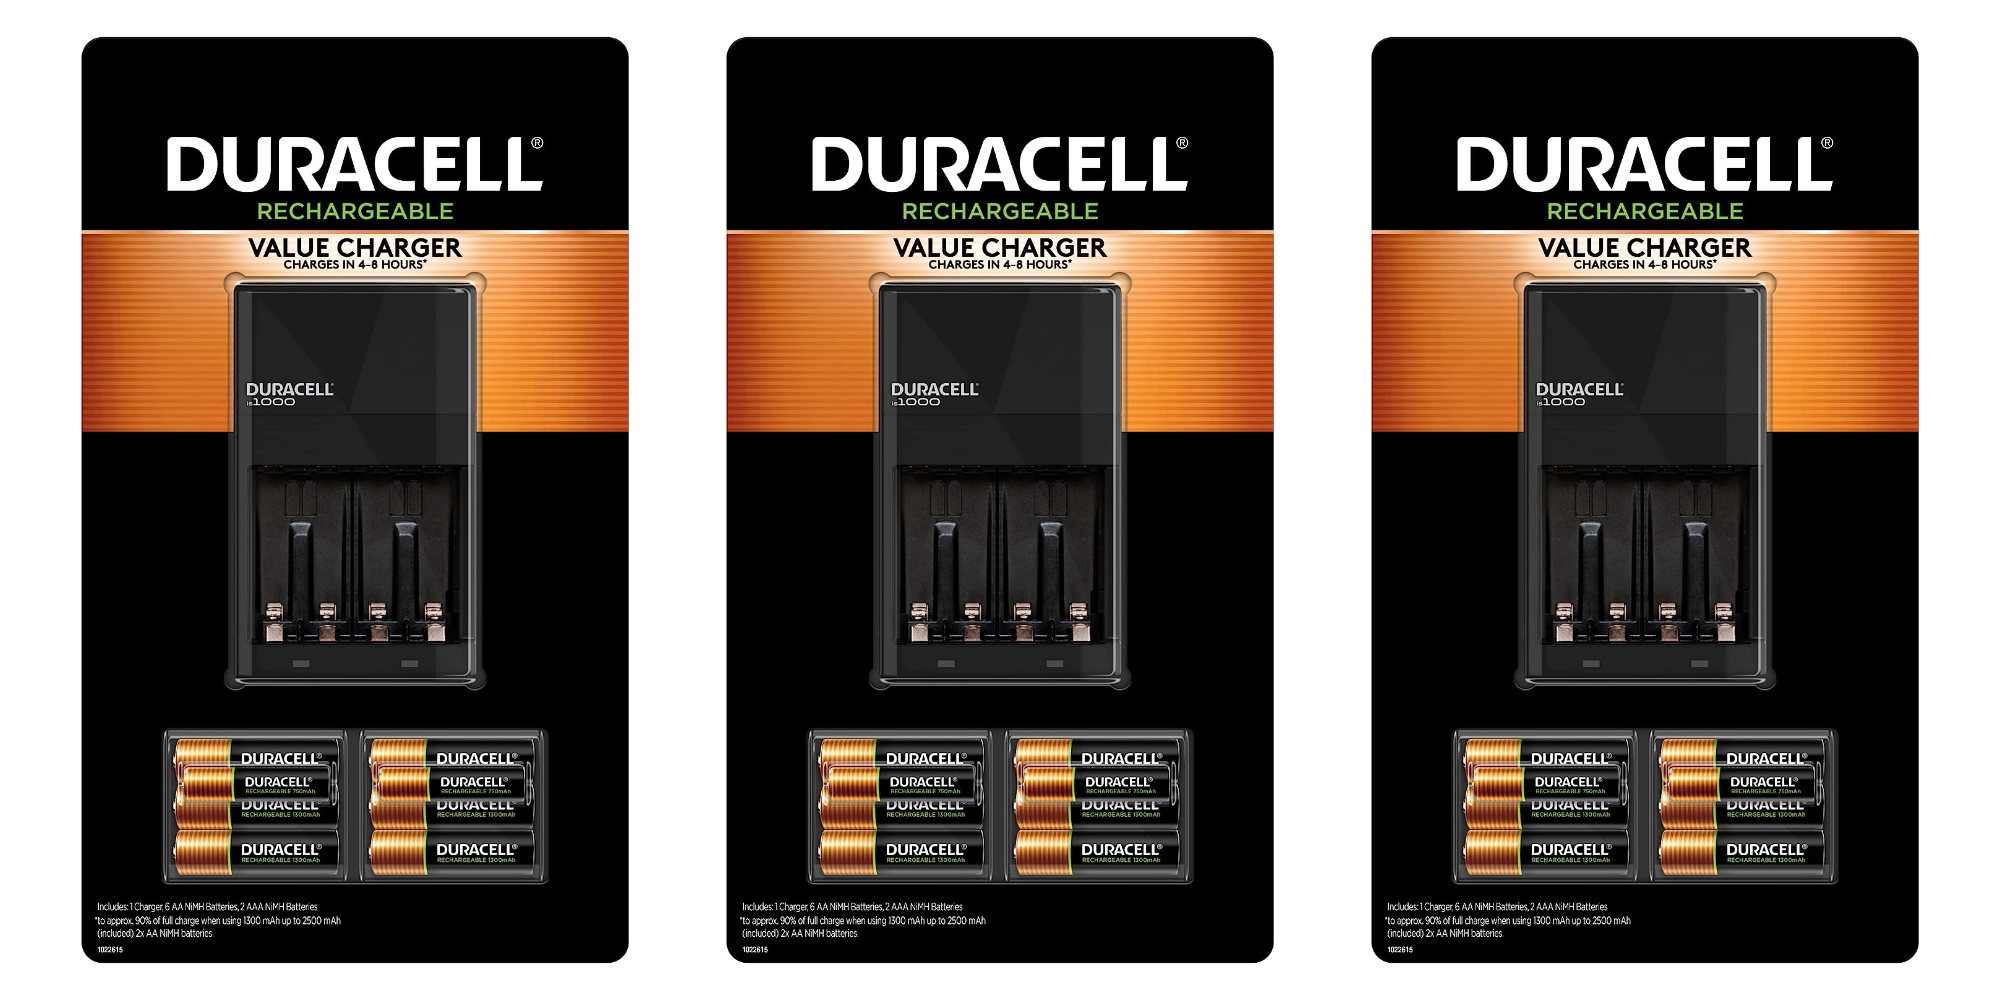 Duracell's rechargeable battery bundle includes 6AAs and 2AAAs for low $20  (Reg. $34)